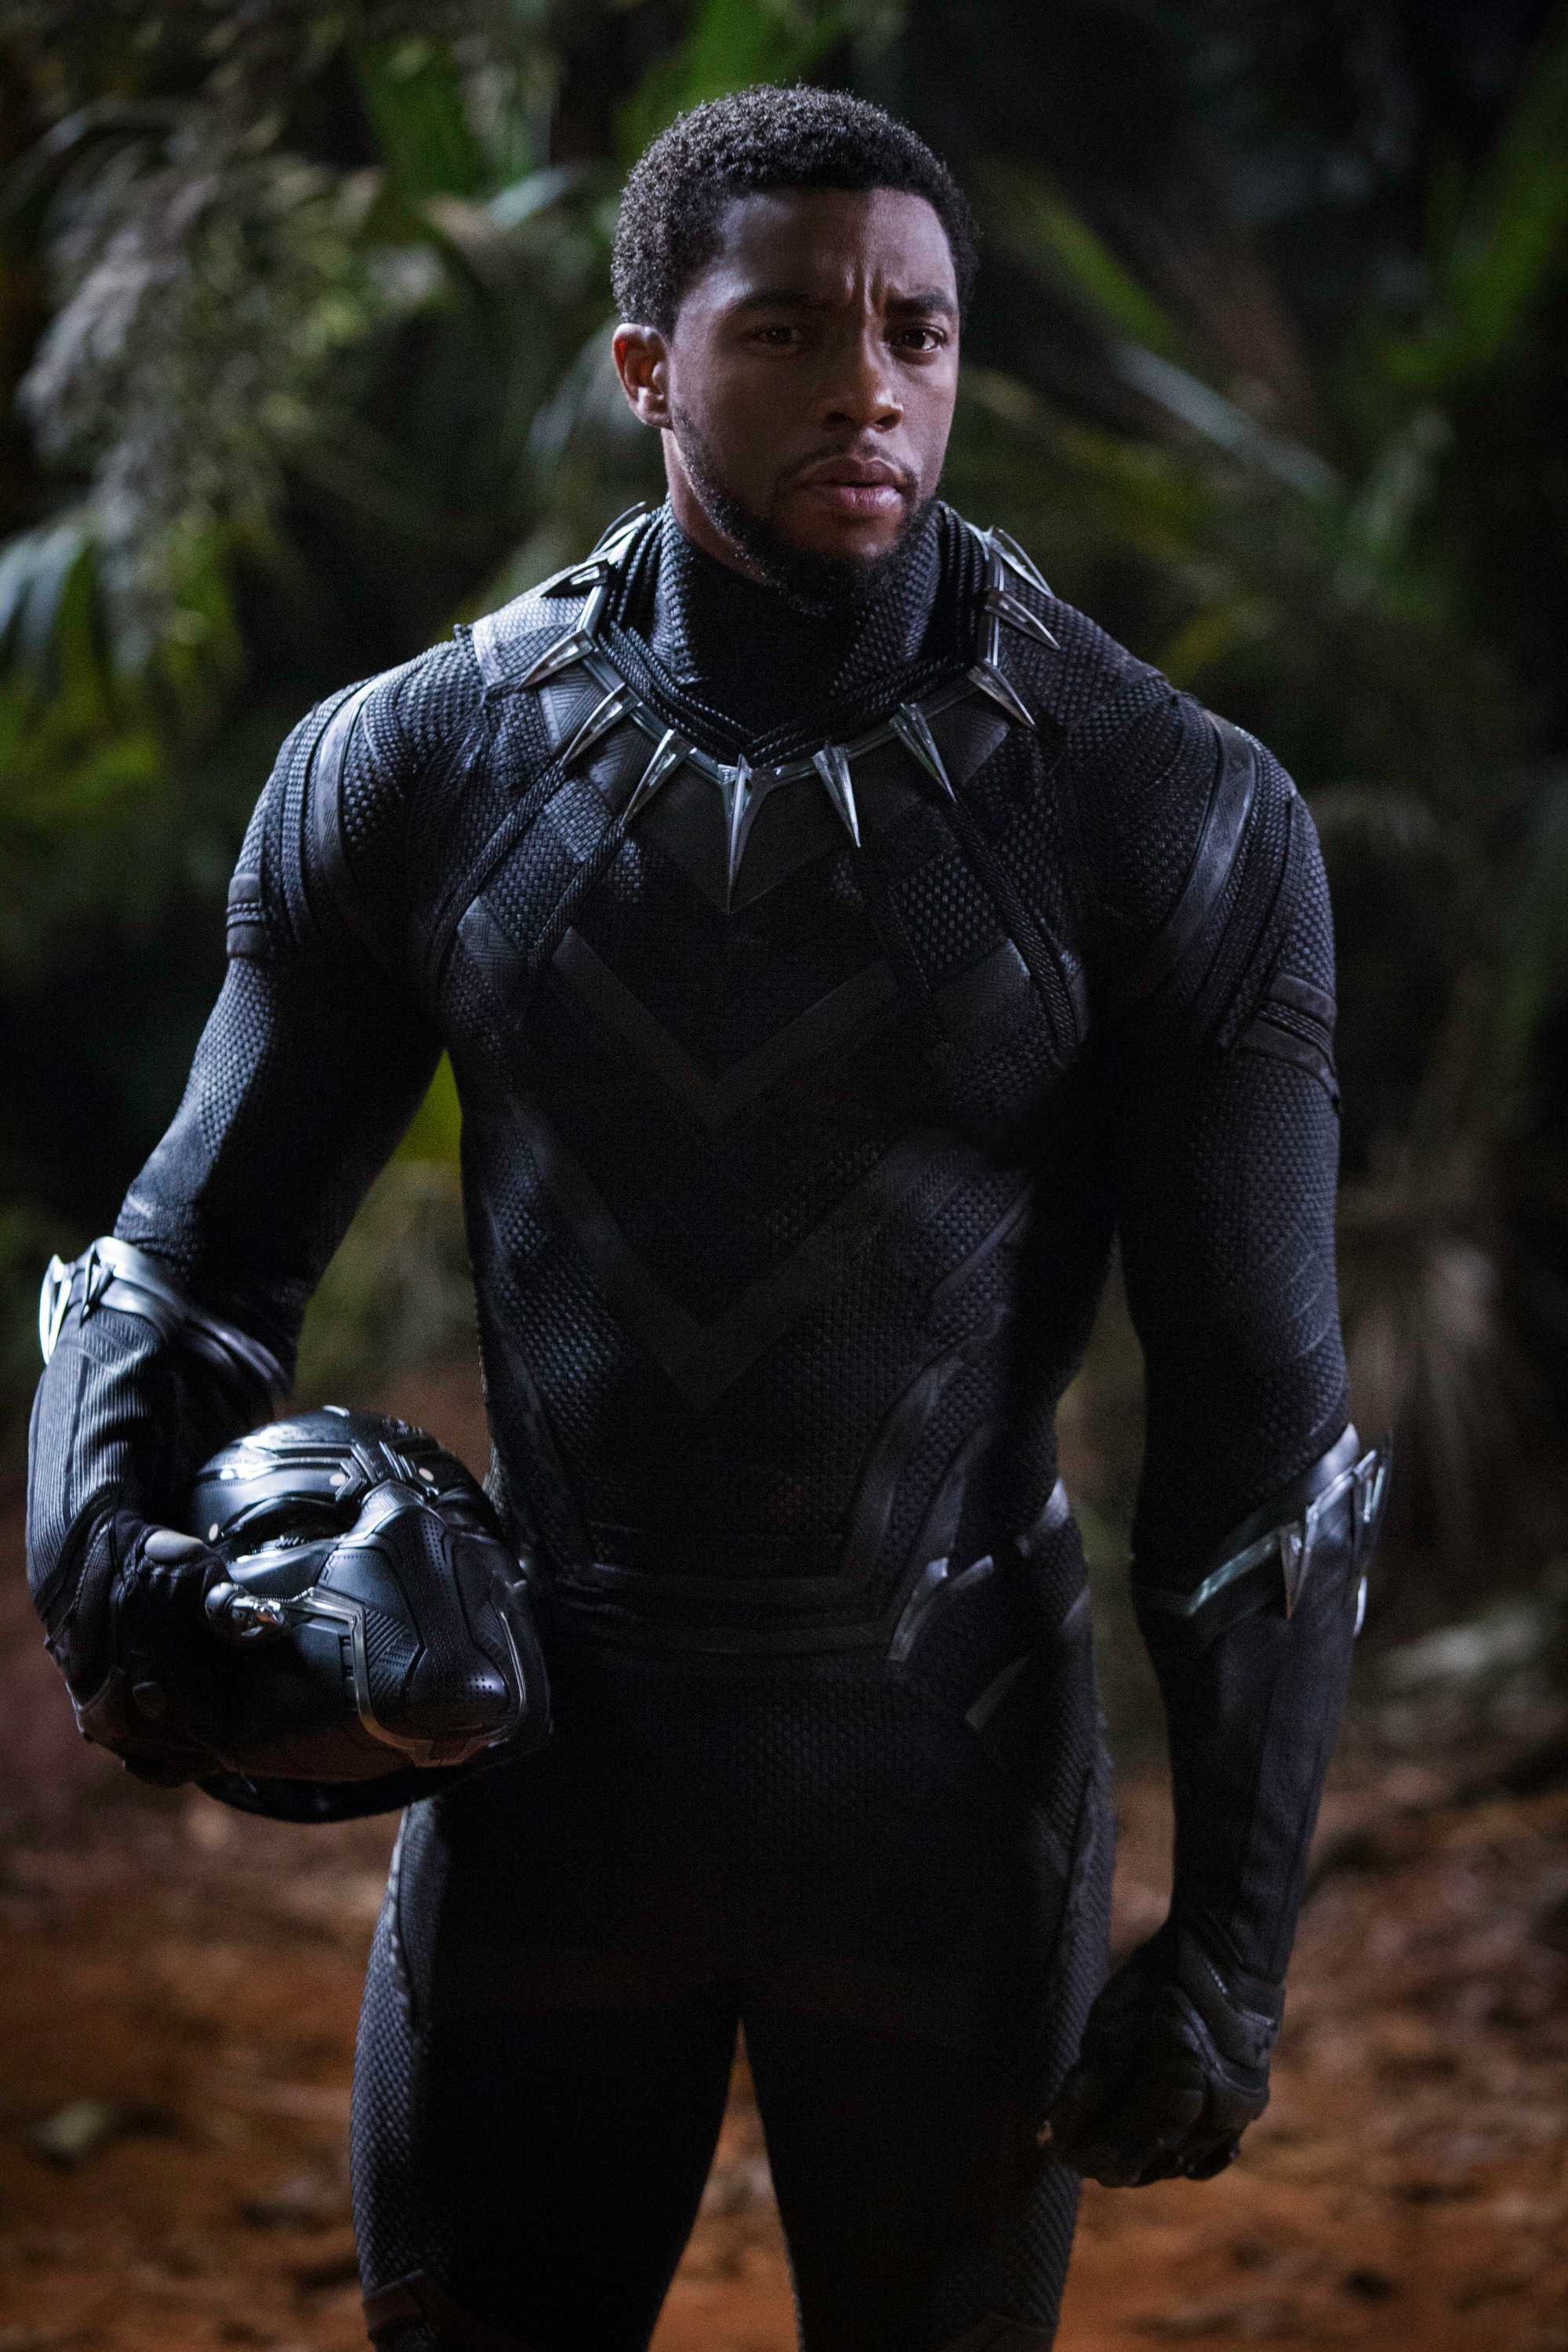 Chadwick Boseman, playing the Black Panther, stands in his suit in a forest, with his helmet off. He is resting it against his hip.